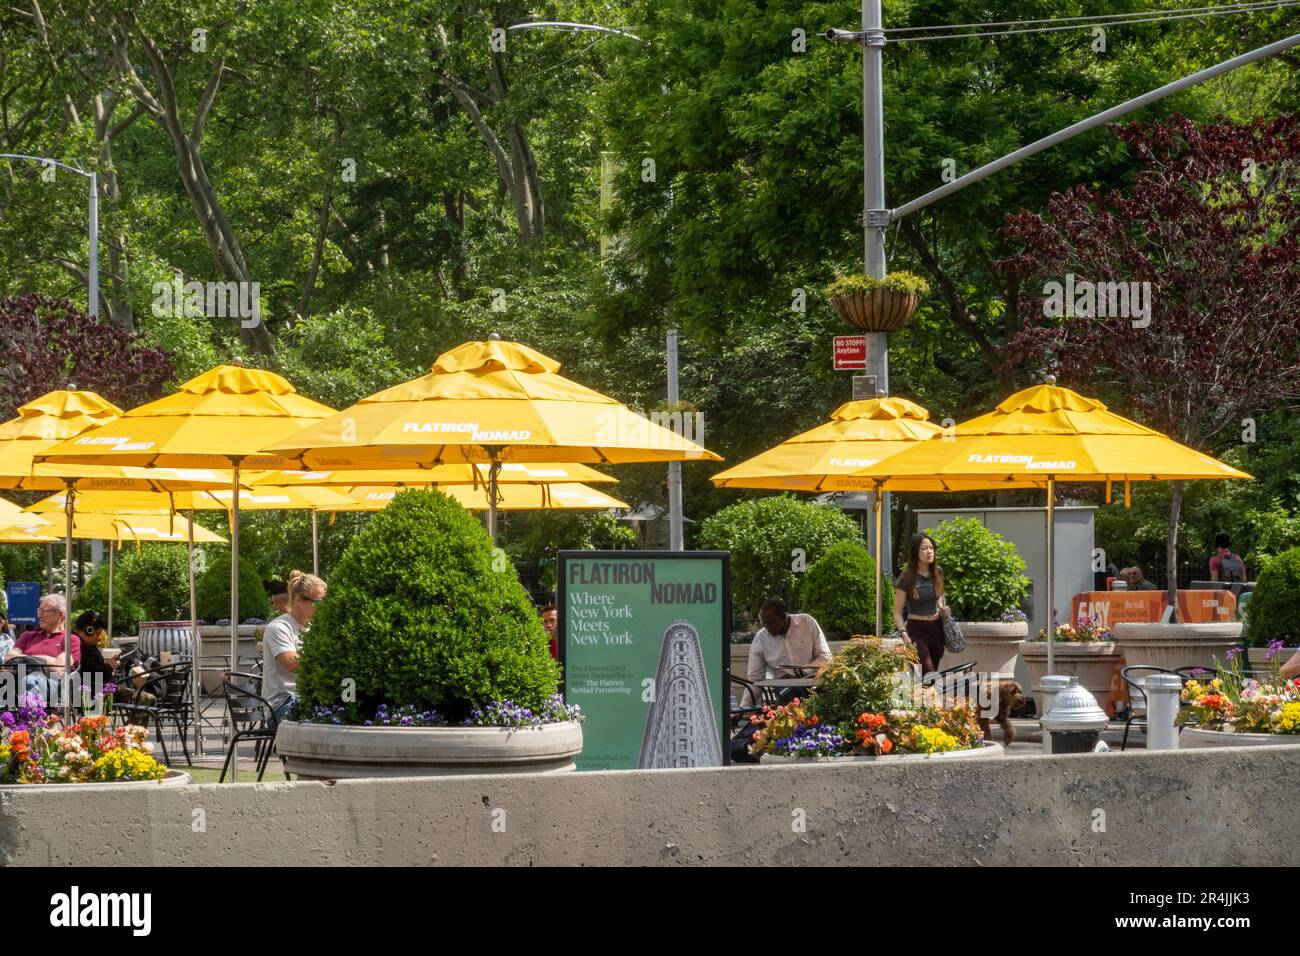 The public seating area at fifth Avenue and 23rd St. features bright yellow umbrellas for shade, 2023, New York City, NoMad, United States Stock Photo